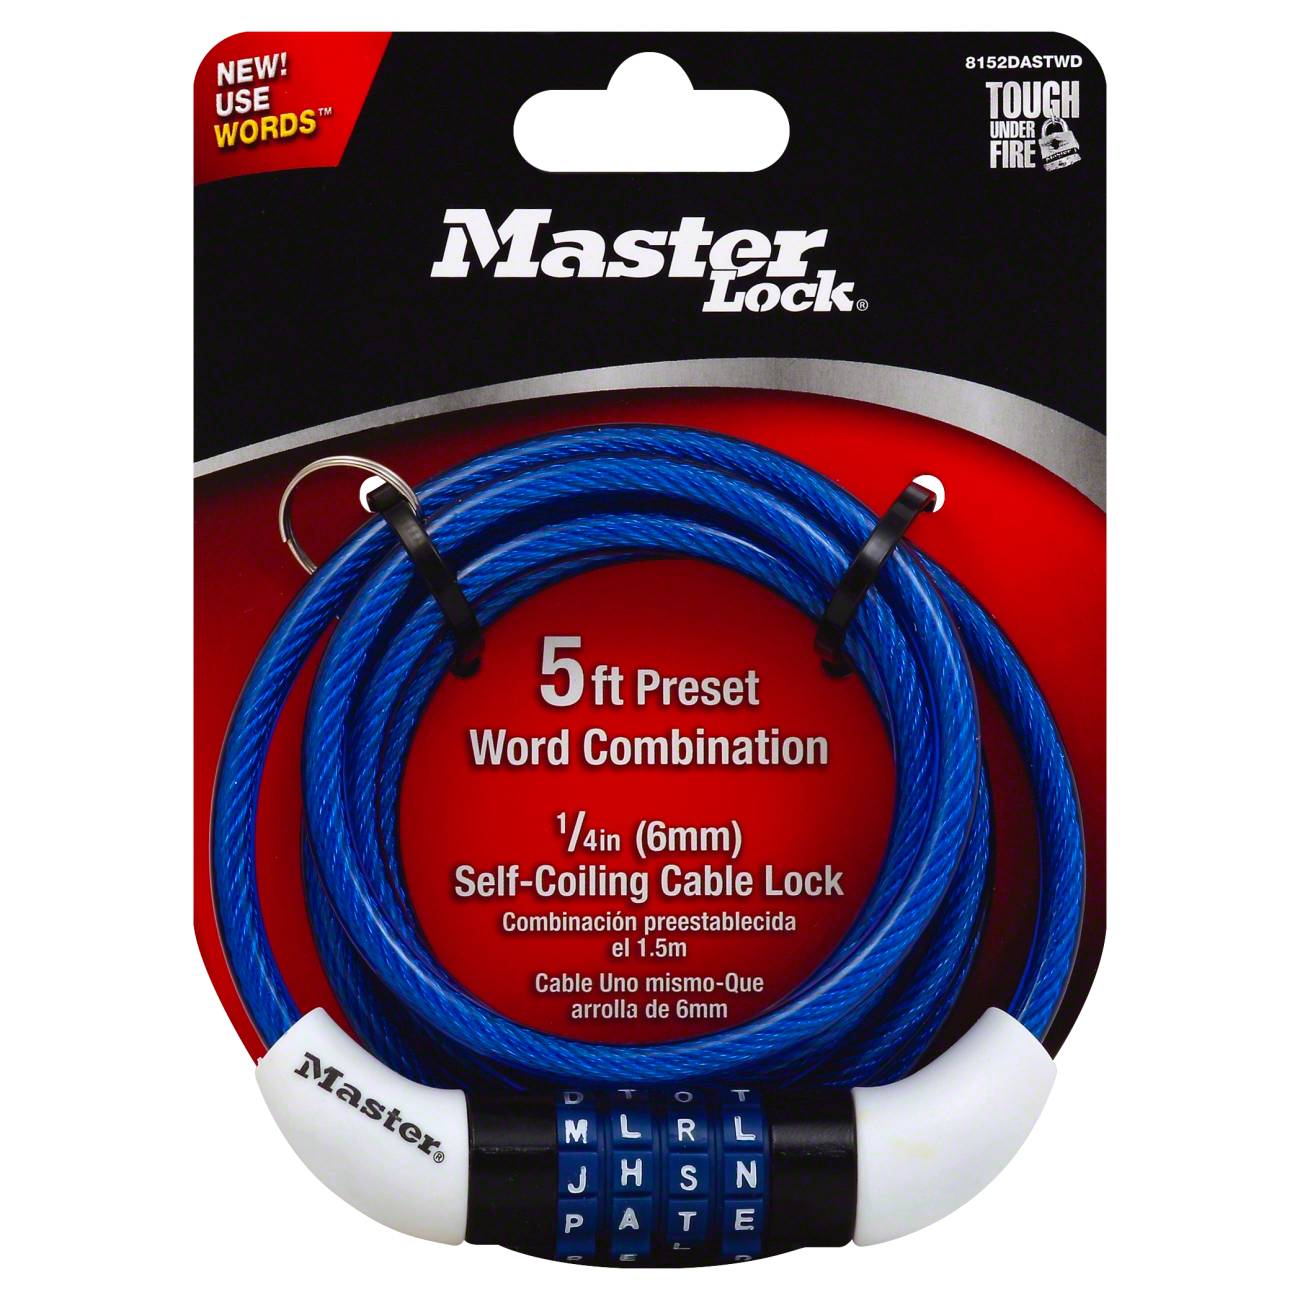 Master Lock Combination Cable Lock, Colors May Vary; image 1 of 4